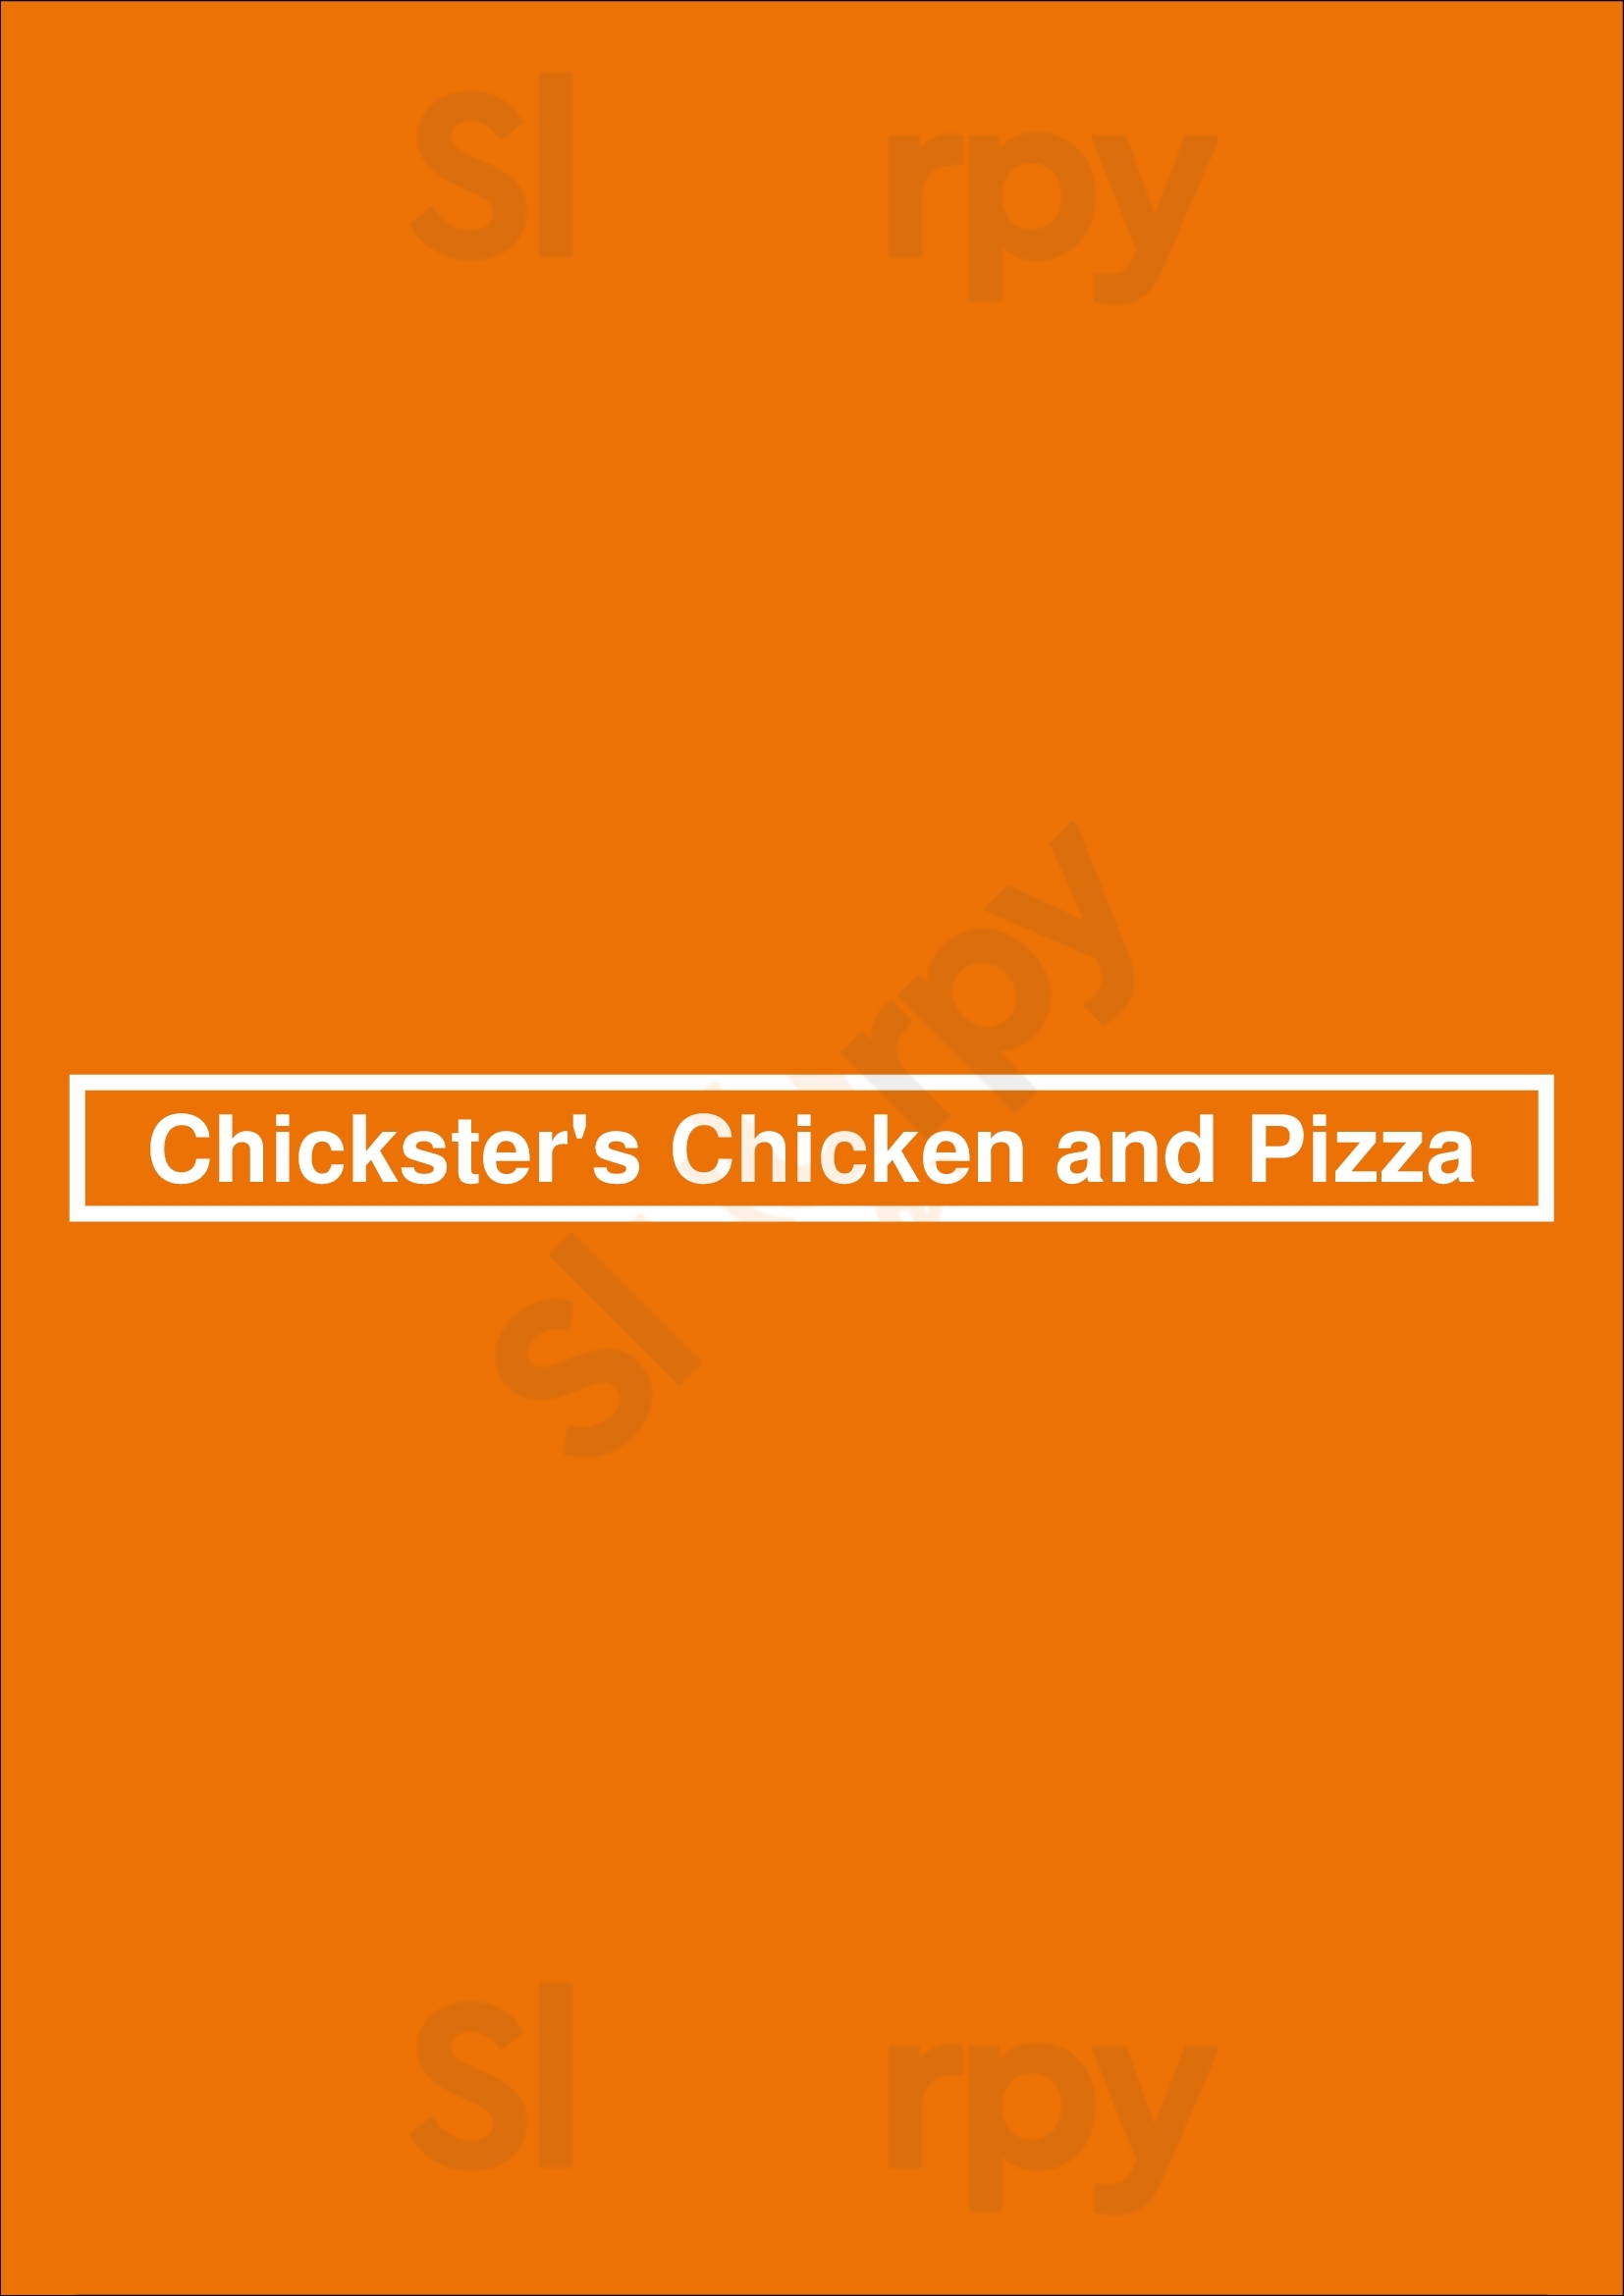 Chickster's Chicken And Pizza Liverpool Menu - 1